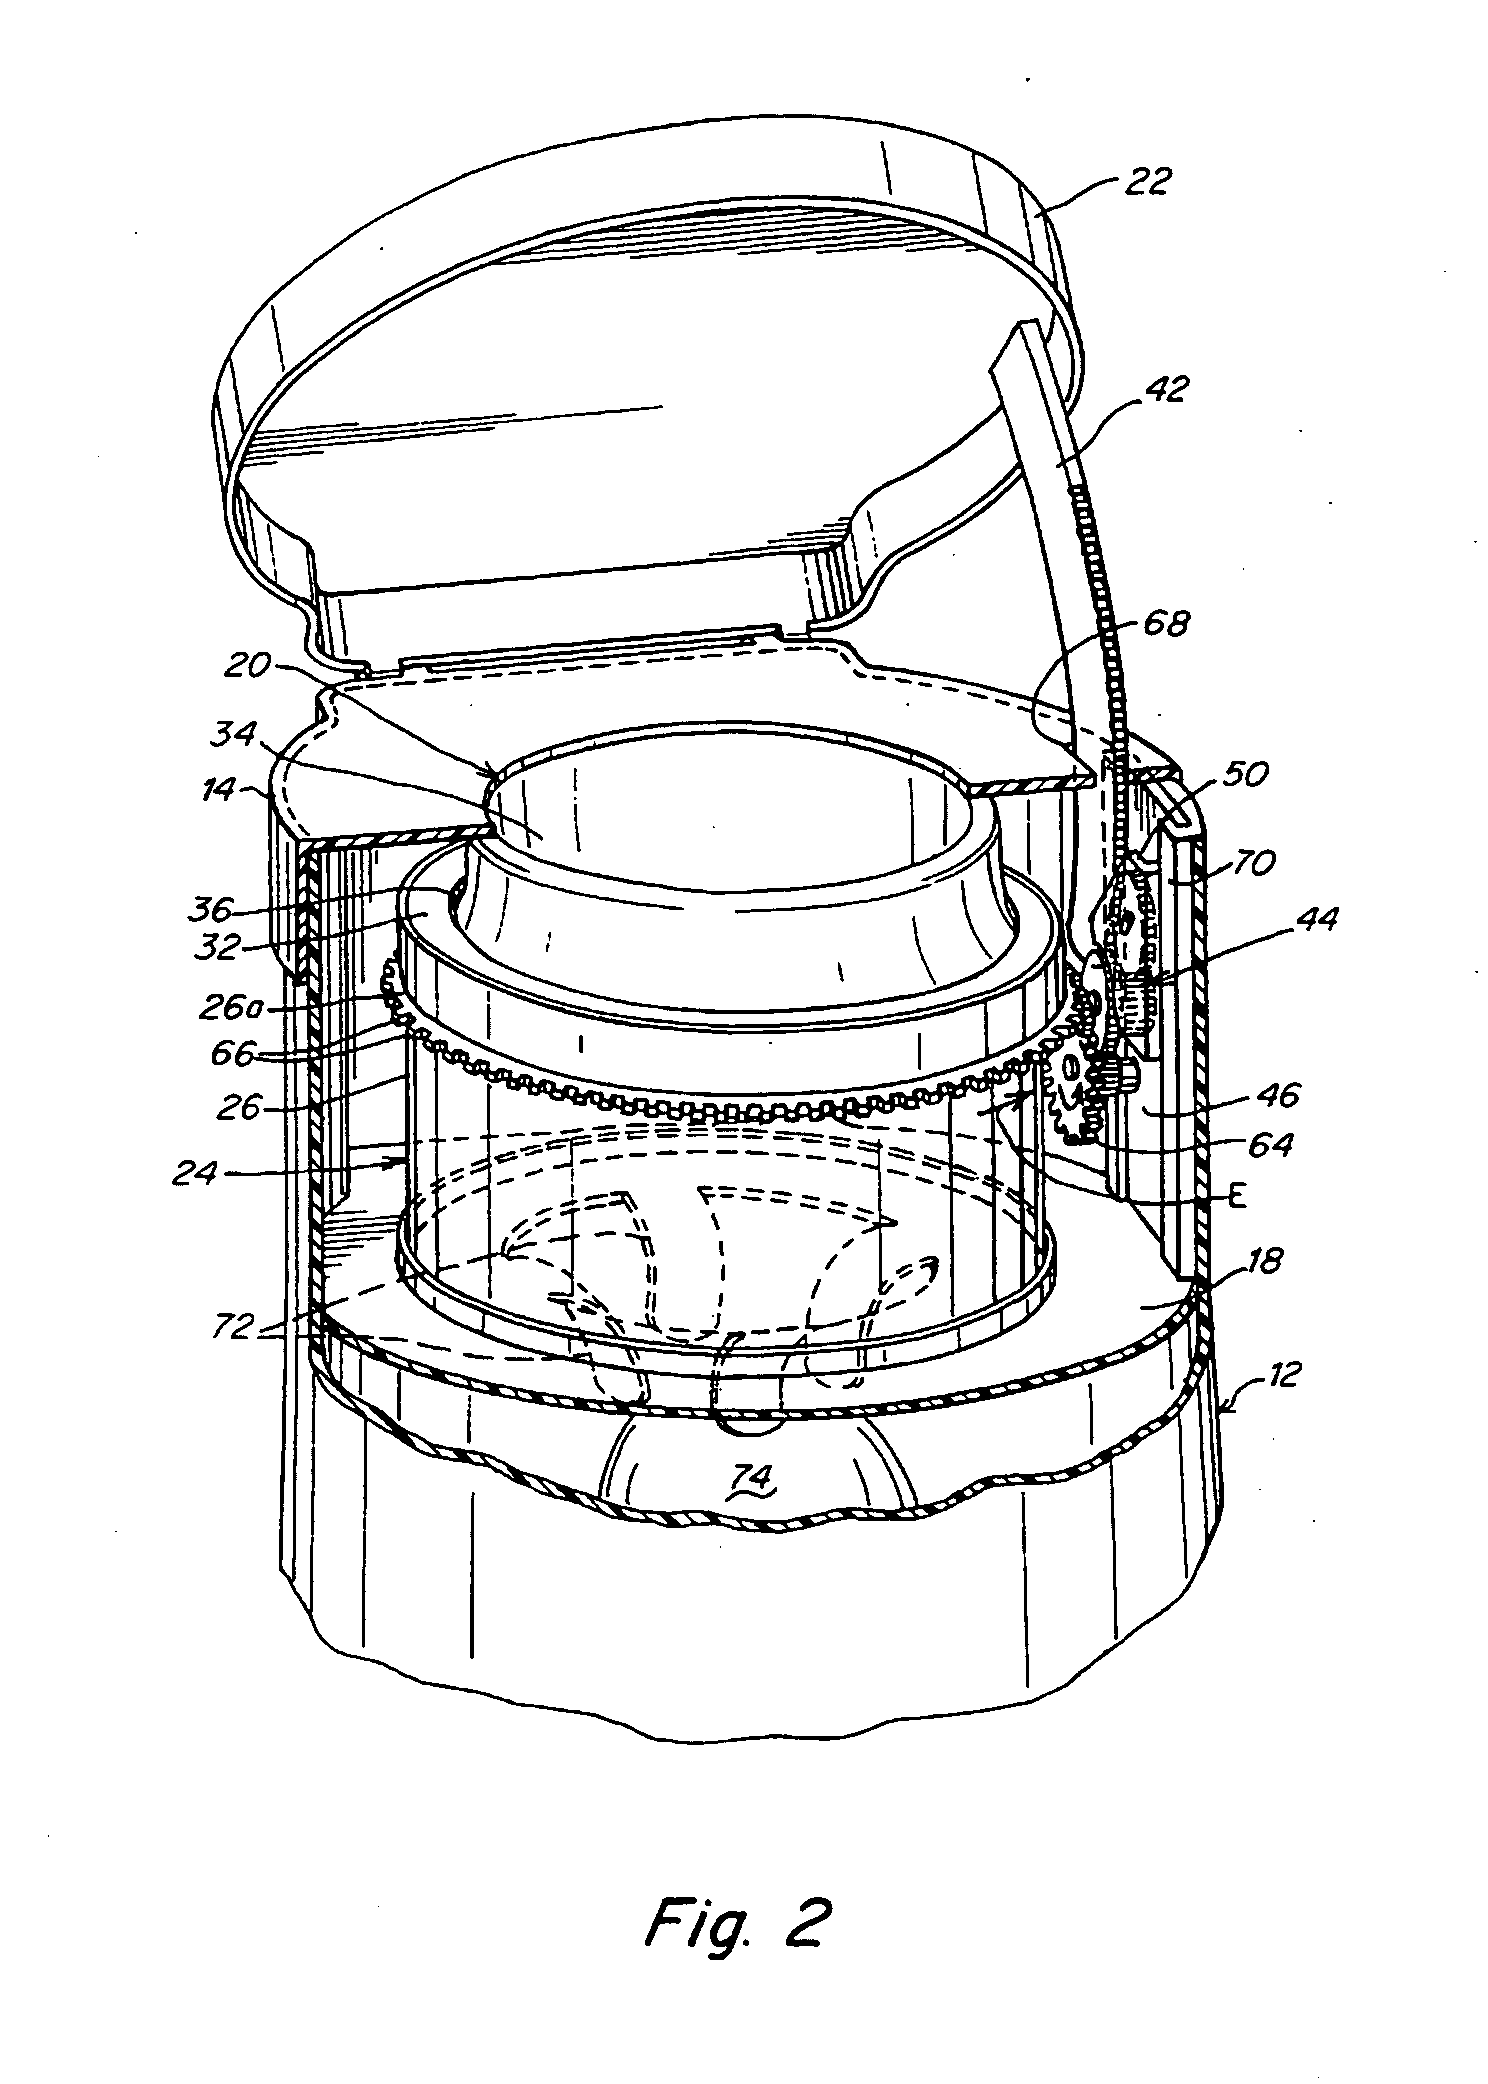 Waste disposal device including a cartridge movable by rollers